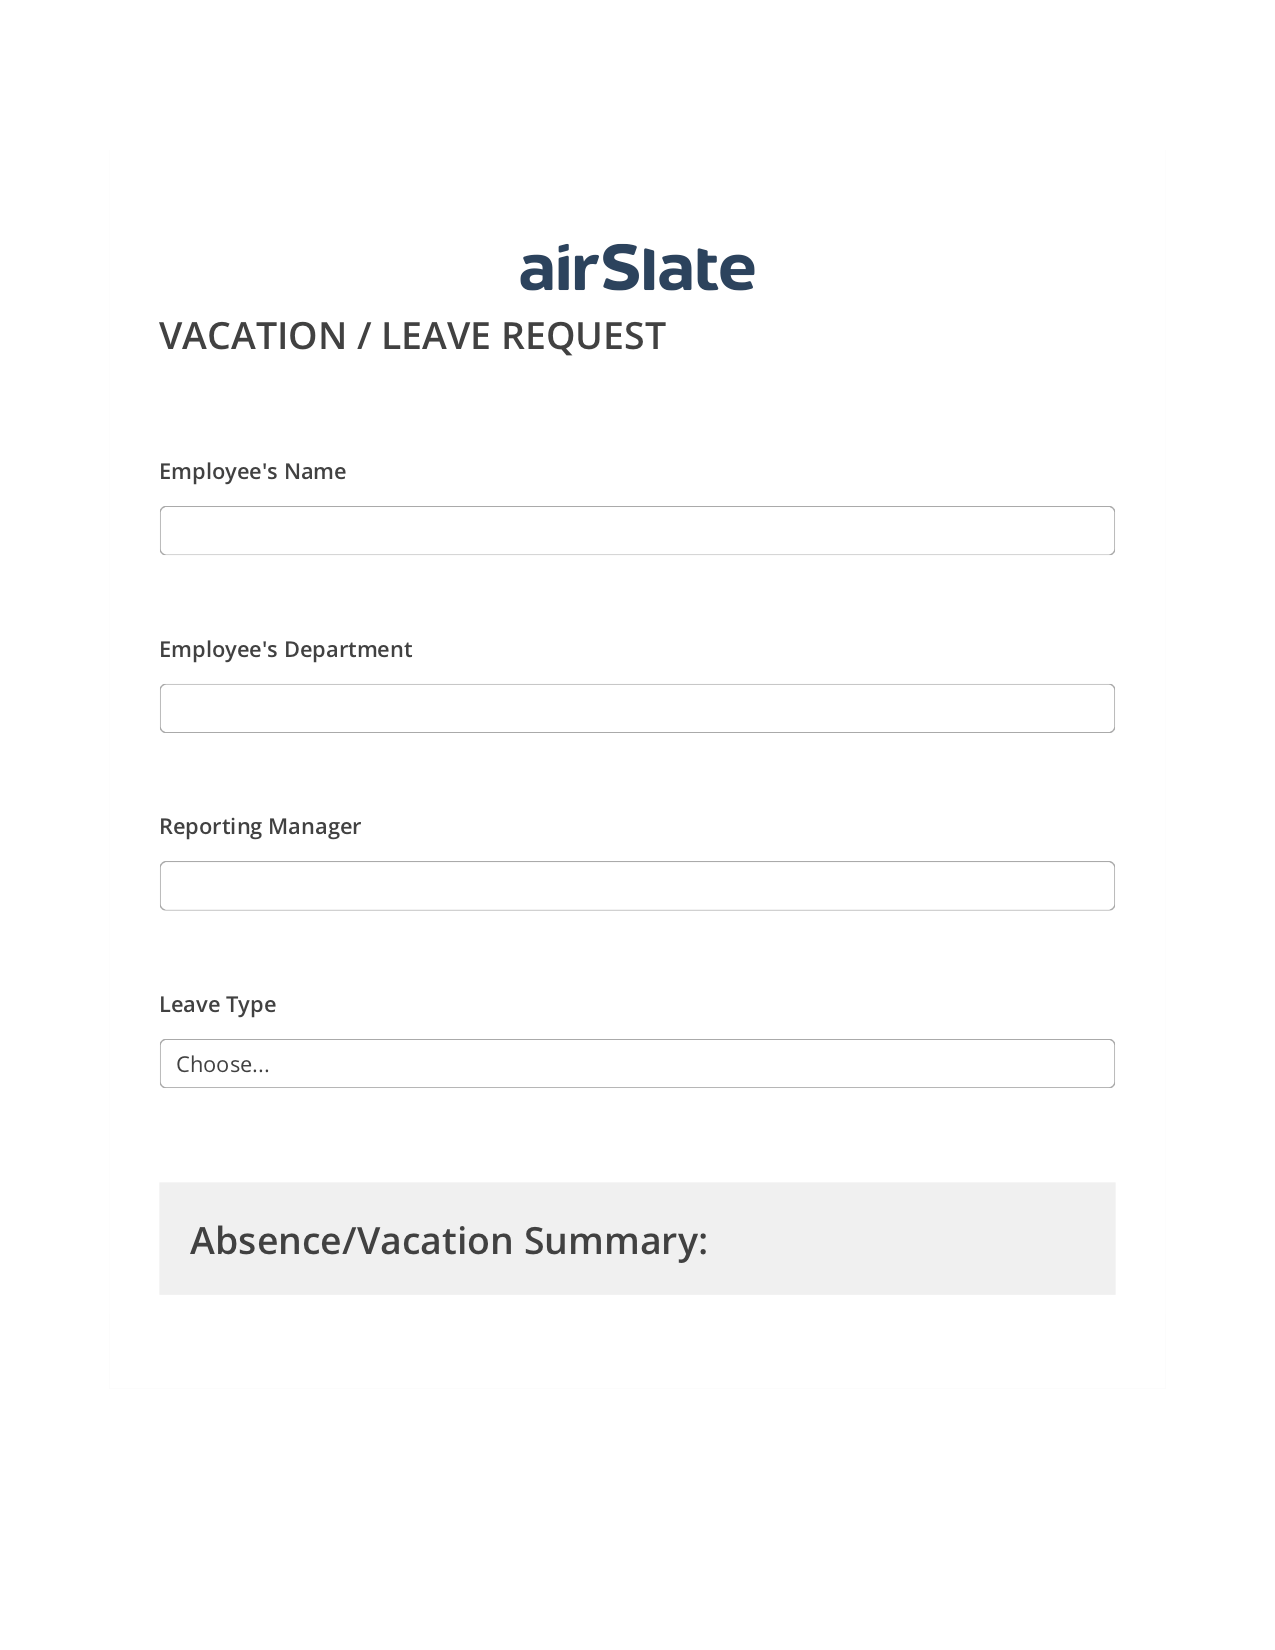 Multirole Vacation/Leave Request Workflow Pre-fill Dropdowns from CSV file Bot, Send Mailchimp Campaign Bot, Archive to SharePoint Folder Bot